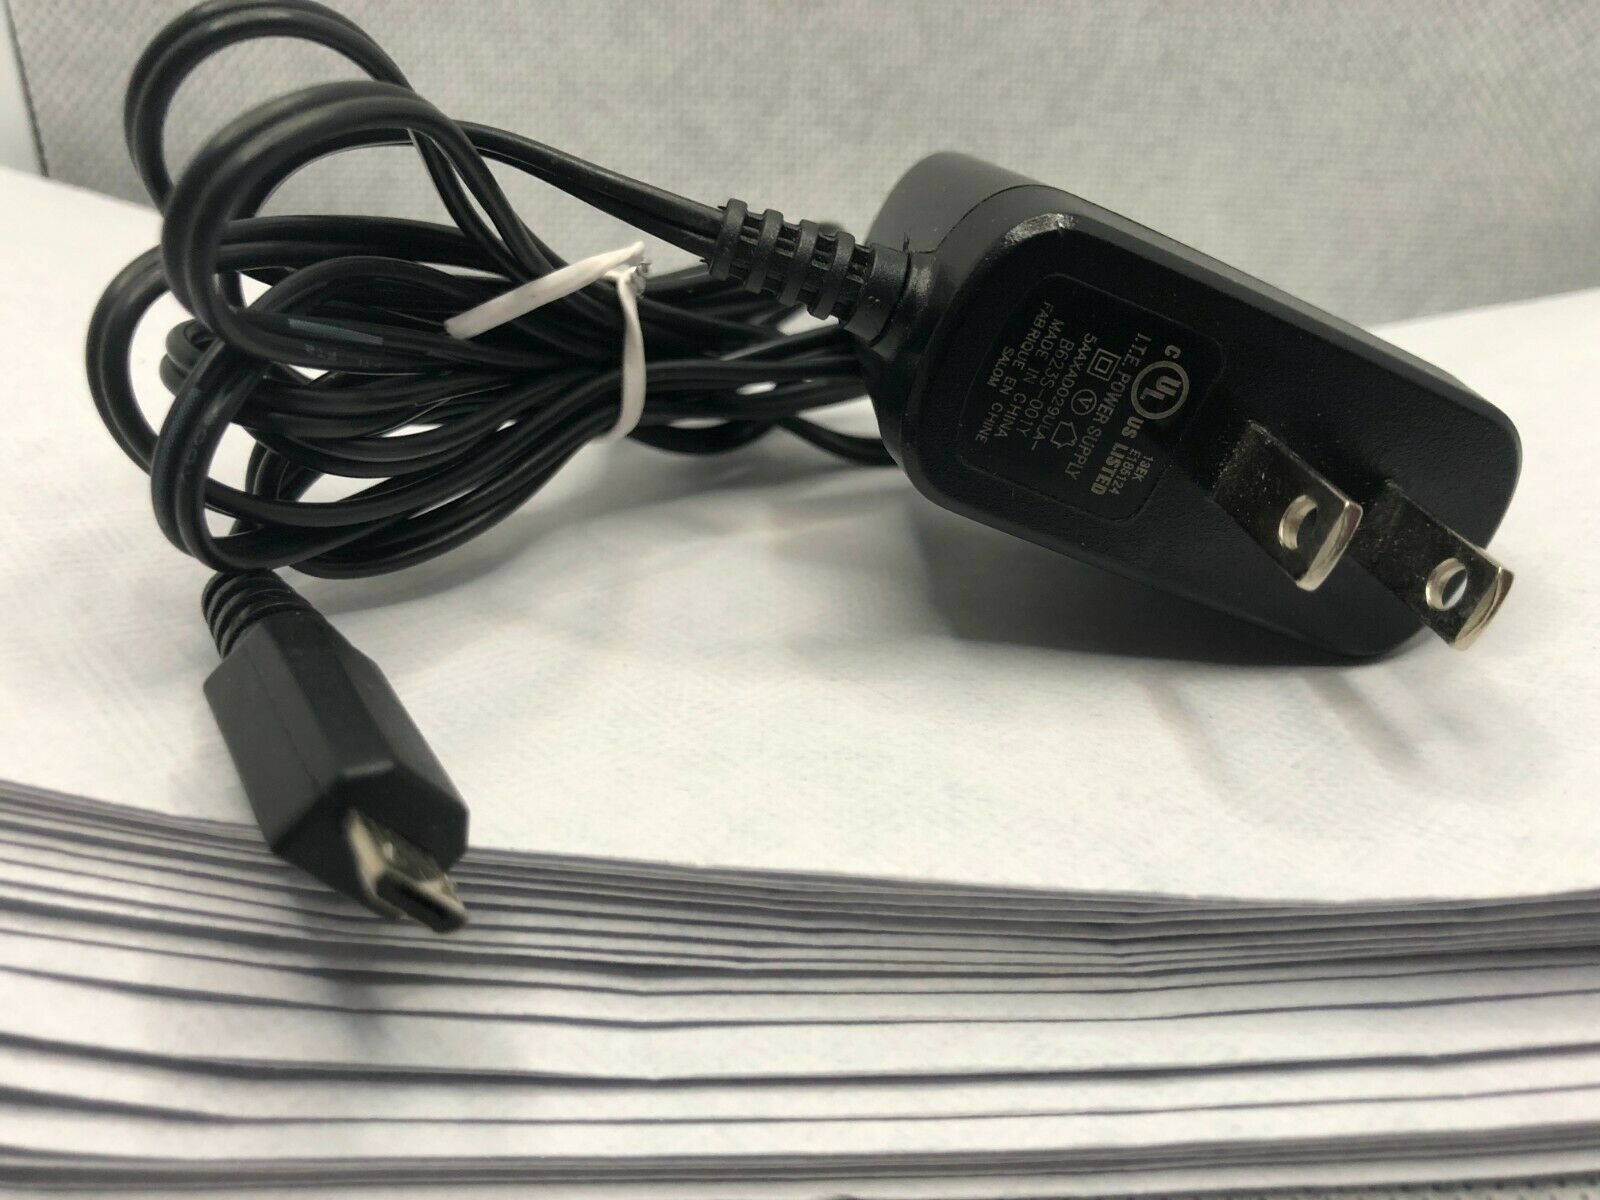 Keyocera AC Adapter SCP-31ADT Power Supply 5v 800mah Type: AC to DC Adapter MPN: Does Not Apply Model: AC Adapter - Click Image to Close